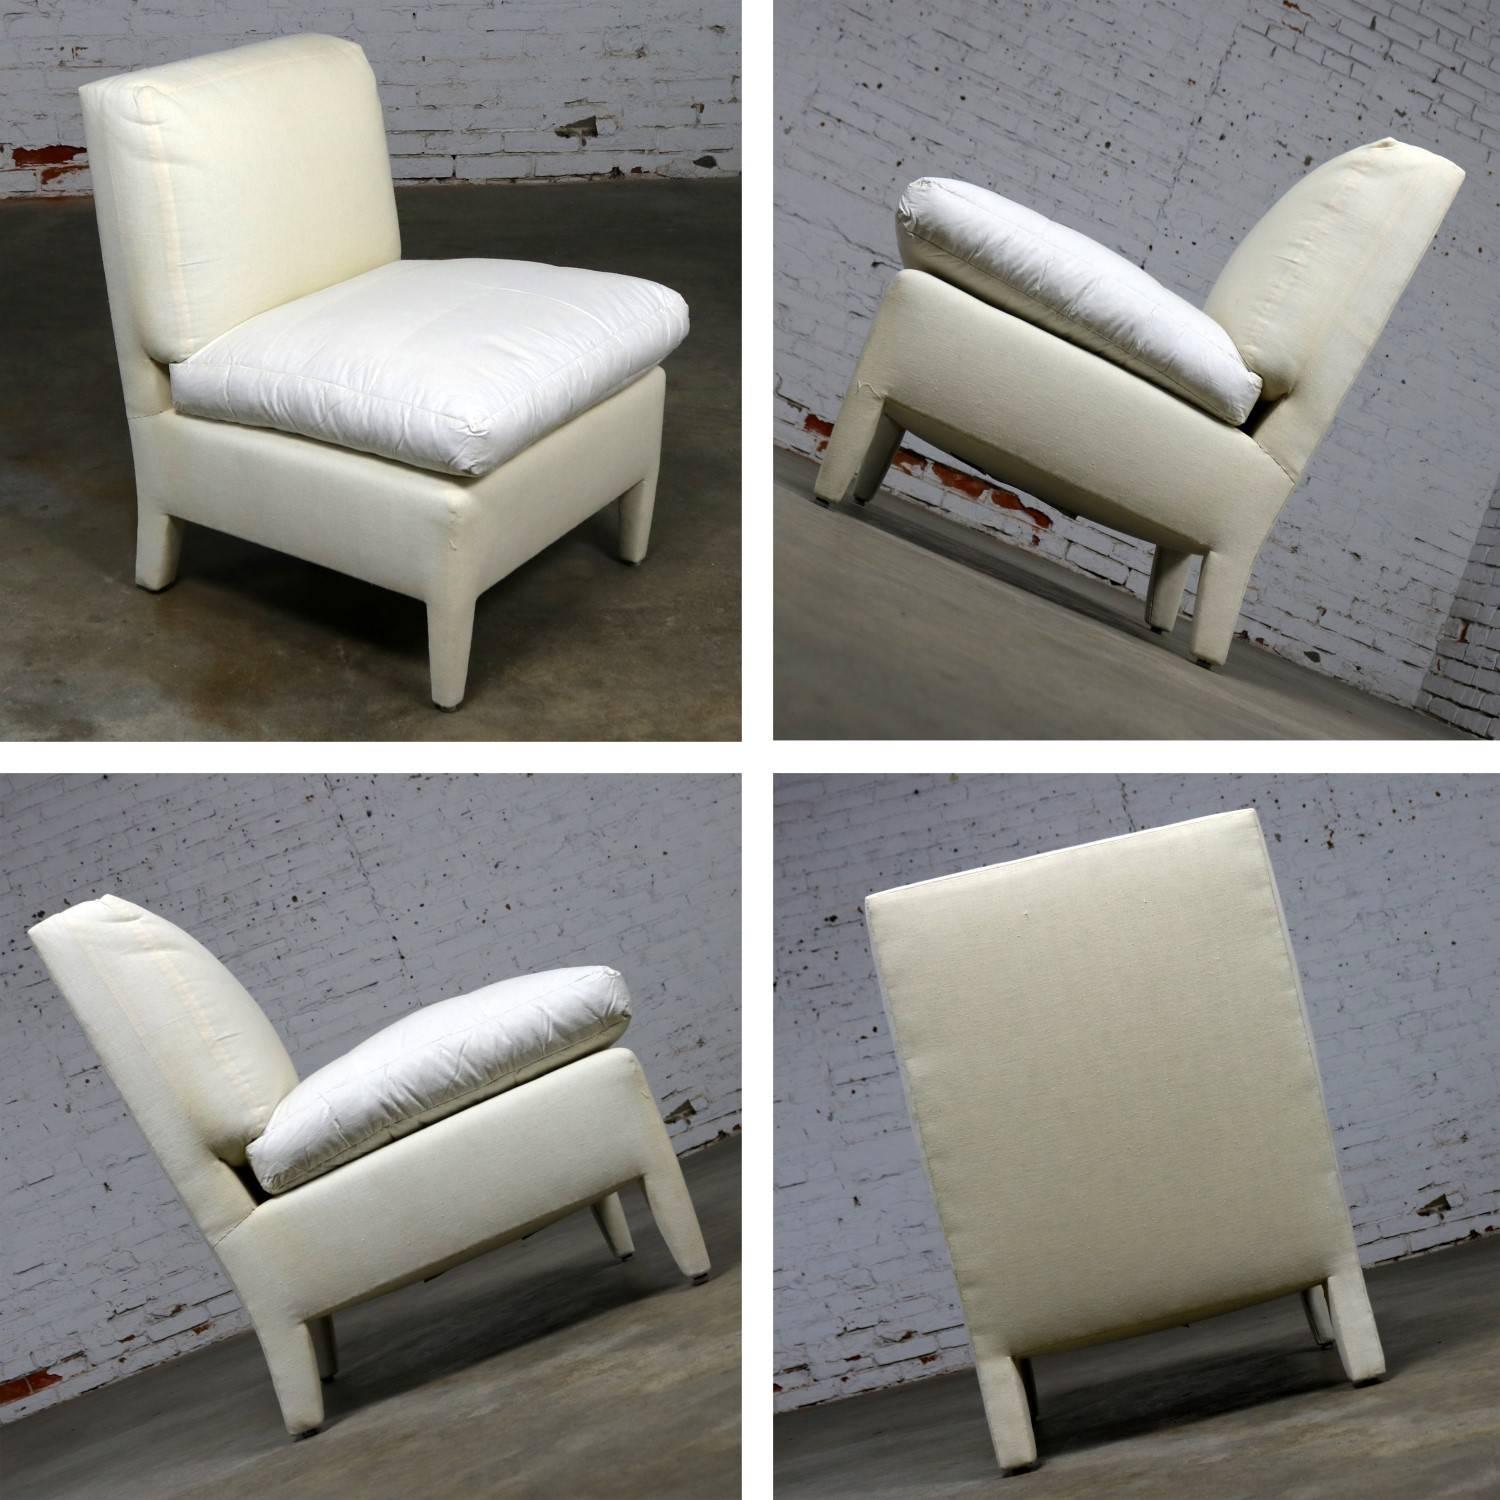 Donghia Slipper Chair by Angelo Donghia, One Slipcovered One Not 3